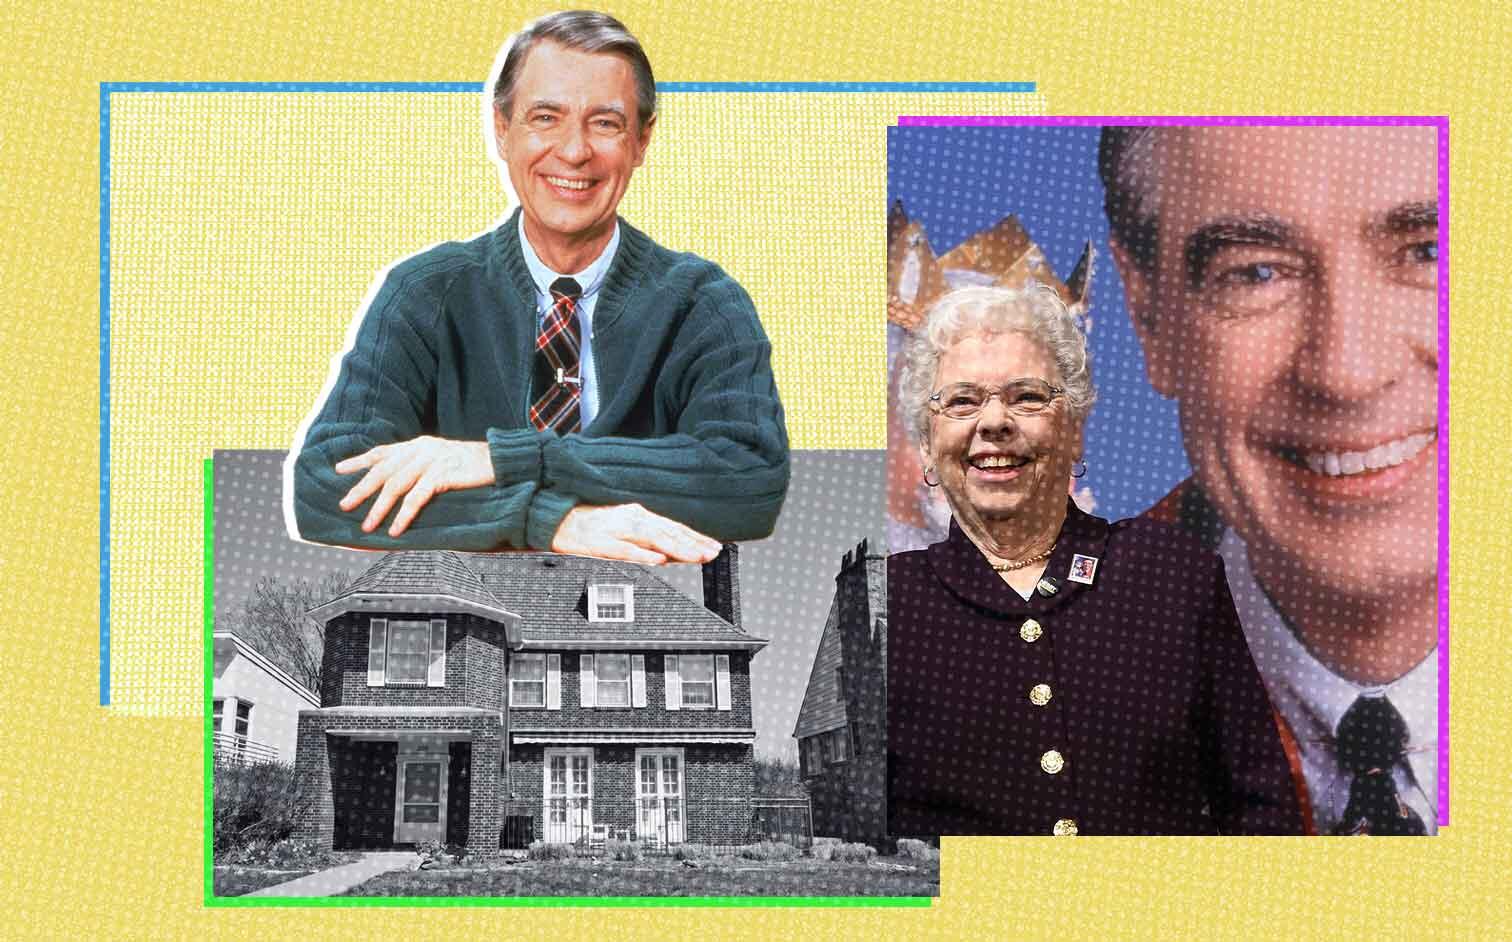 The home in Pittsburgh with Fred Rogers and his wife Joanne Rogers (Realtor, Getty)